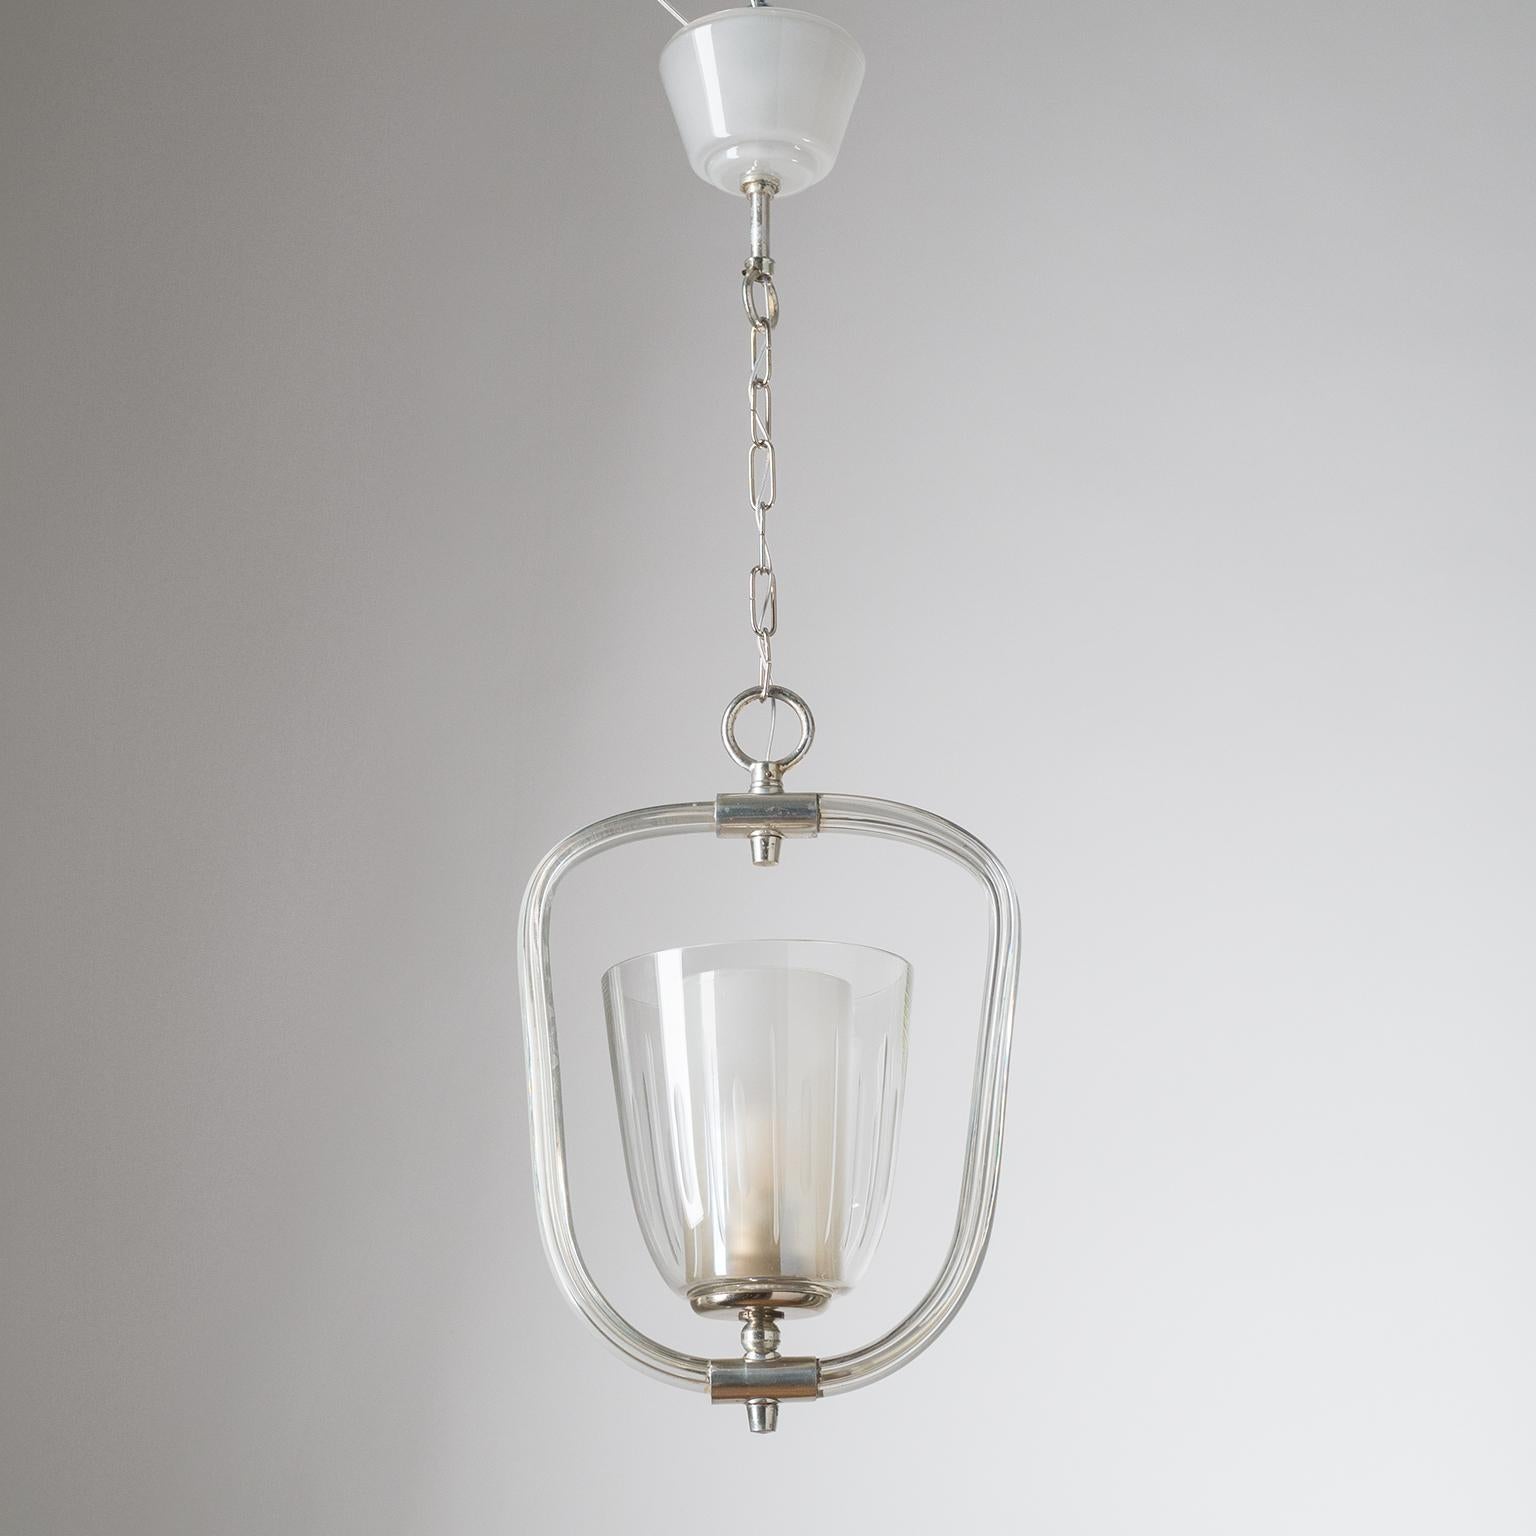 Fine Austrian glass lantern from the 1930-1940s. All blown-glass body with dual glass diffusers - the outer in clear glass with cut decorations, the inner glass is frosted with a slightly iridescent coating - and frosted glass canopy. Metal parts